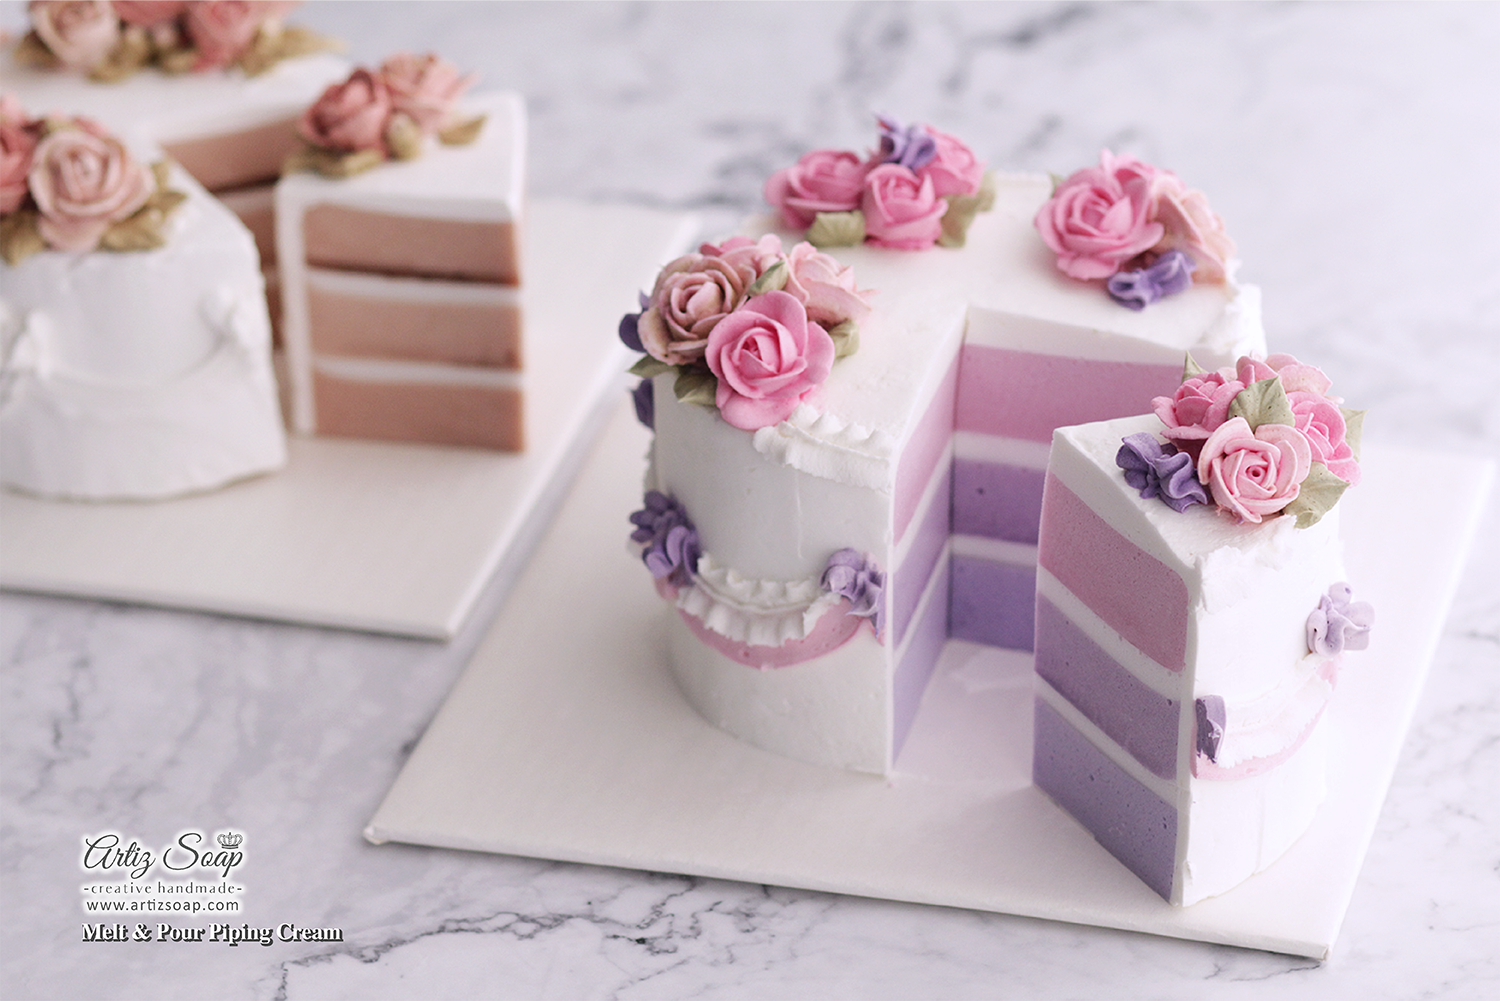 Hand Soap Layer Cake - Classy Girl Cupcakes